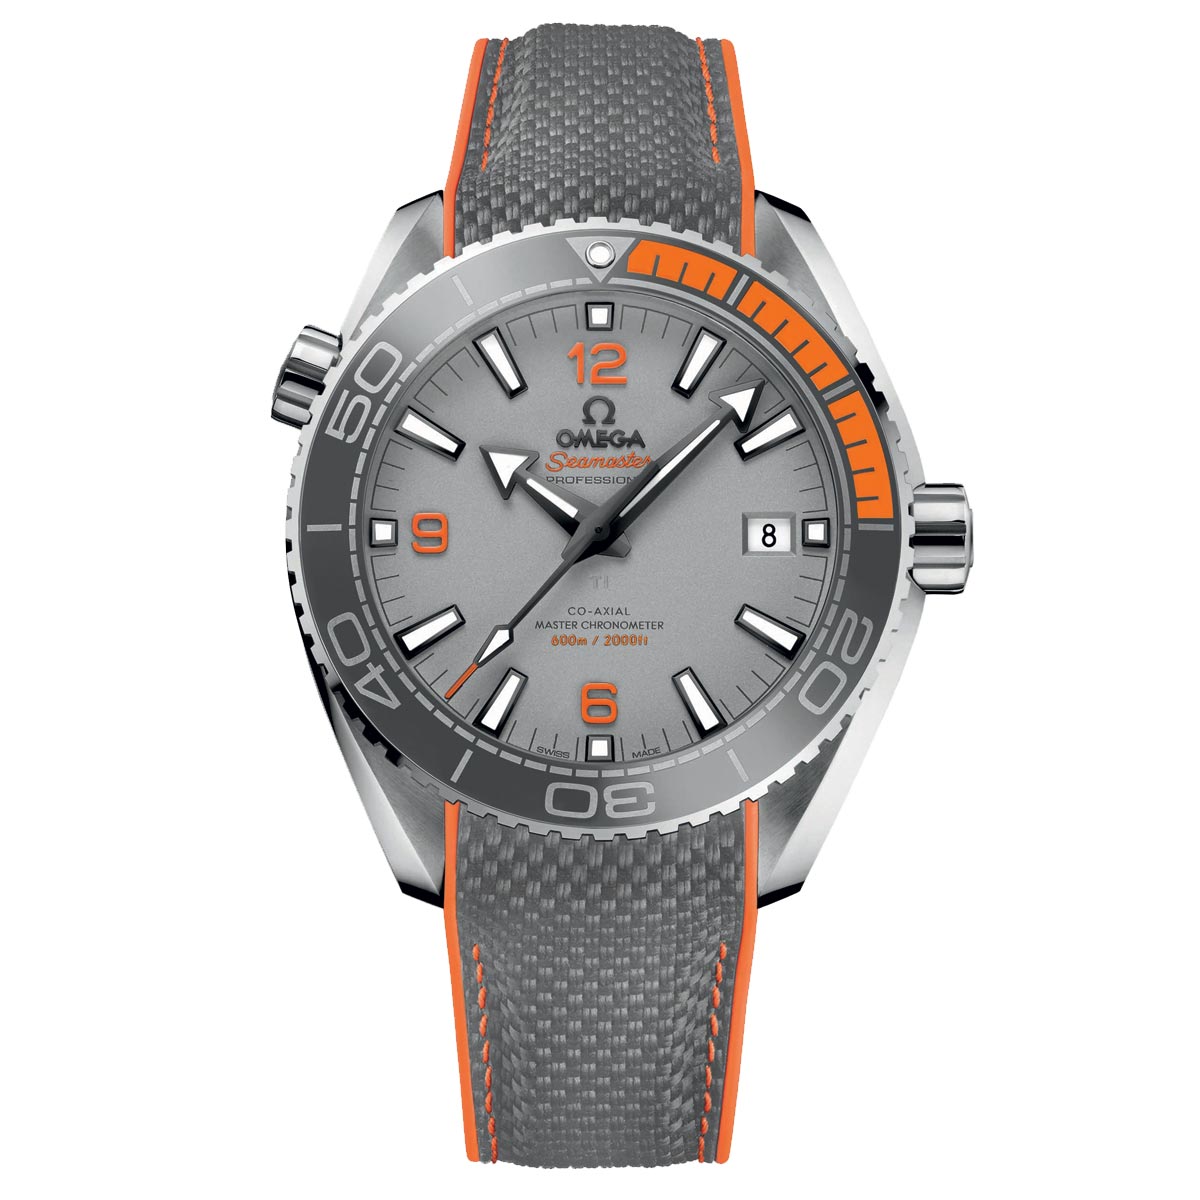 OMEGA Seamaster Planet Ocean 600M Co-Axial Master Chronometer 43.5mm Watch